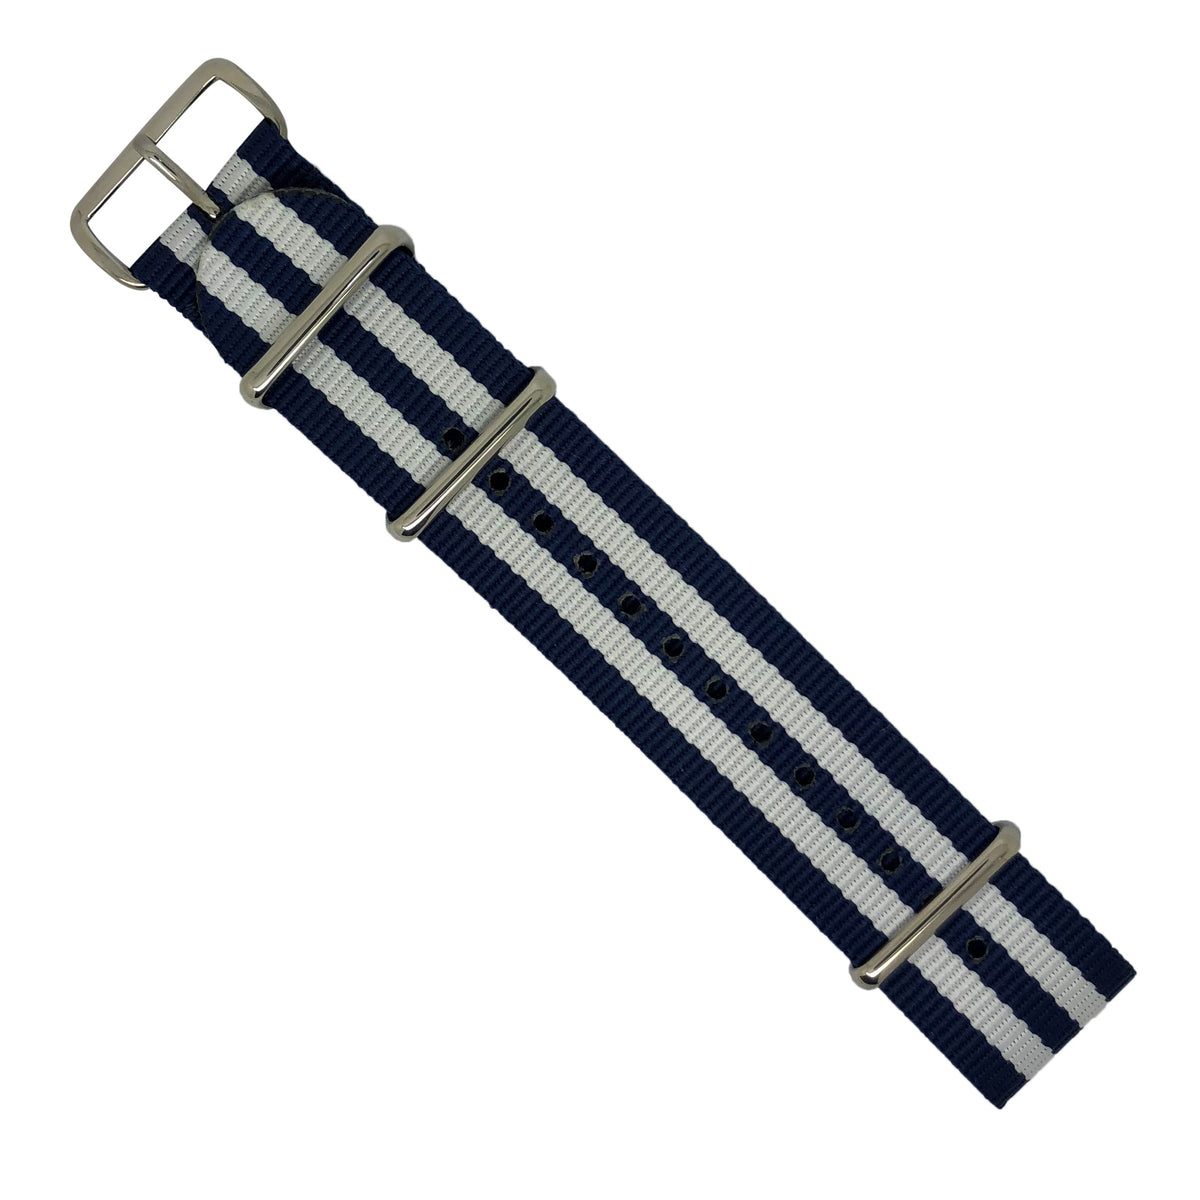 Premium Nato Strap in Navy White Small Stripes with Polished Silver Buckle (22mm) - Nomad watch Works